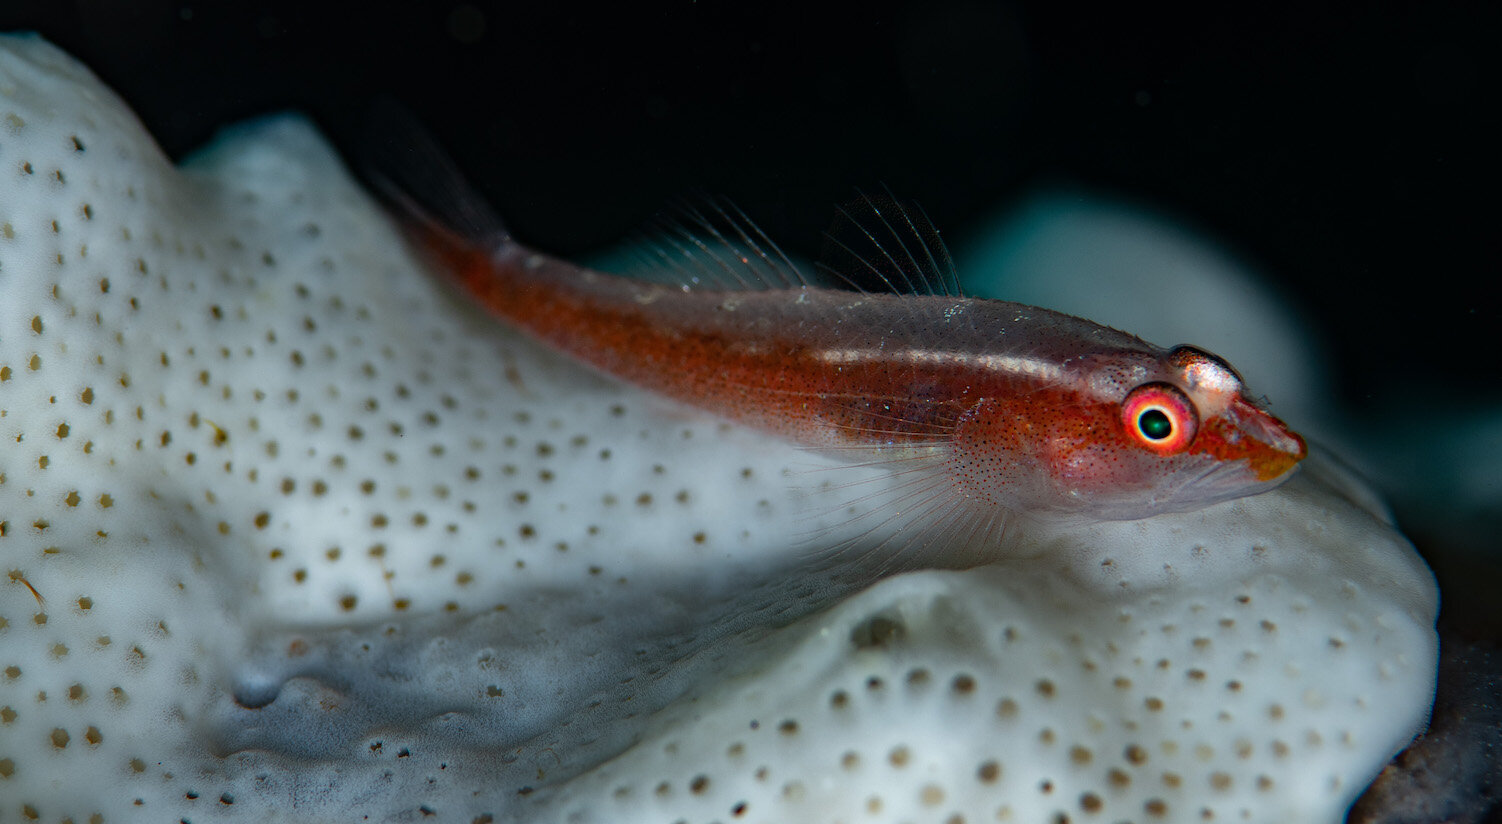 Lembeh Indonesia Blenny by Laura Tesler